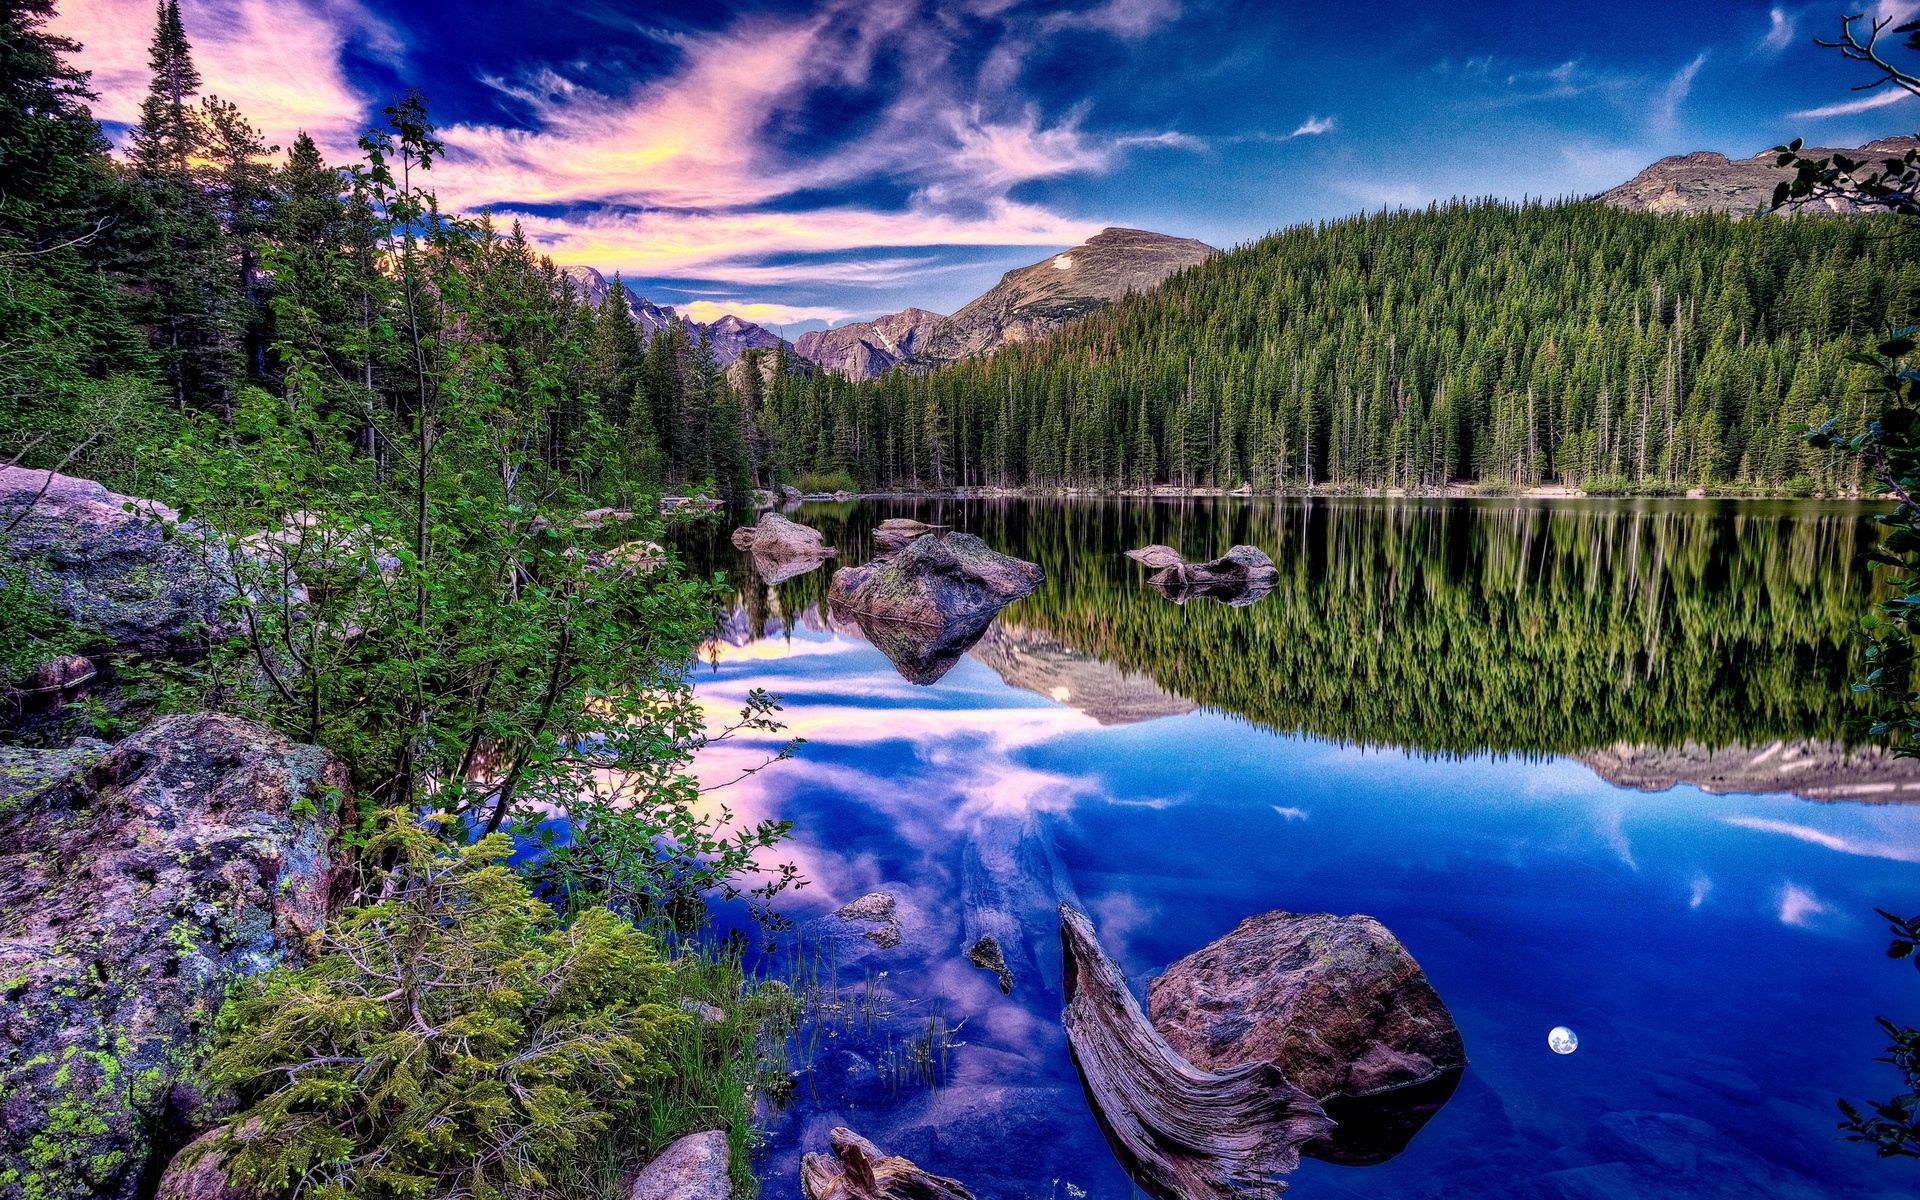 contrast, mountains, shore, clouds, brightly, nature, stones, sky, lake, reflection, bank, forest, mirror, snag images